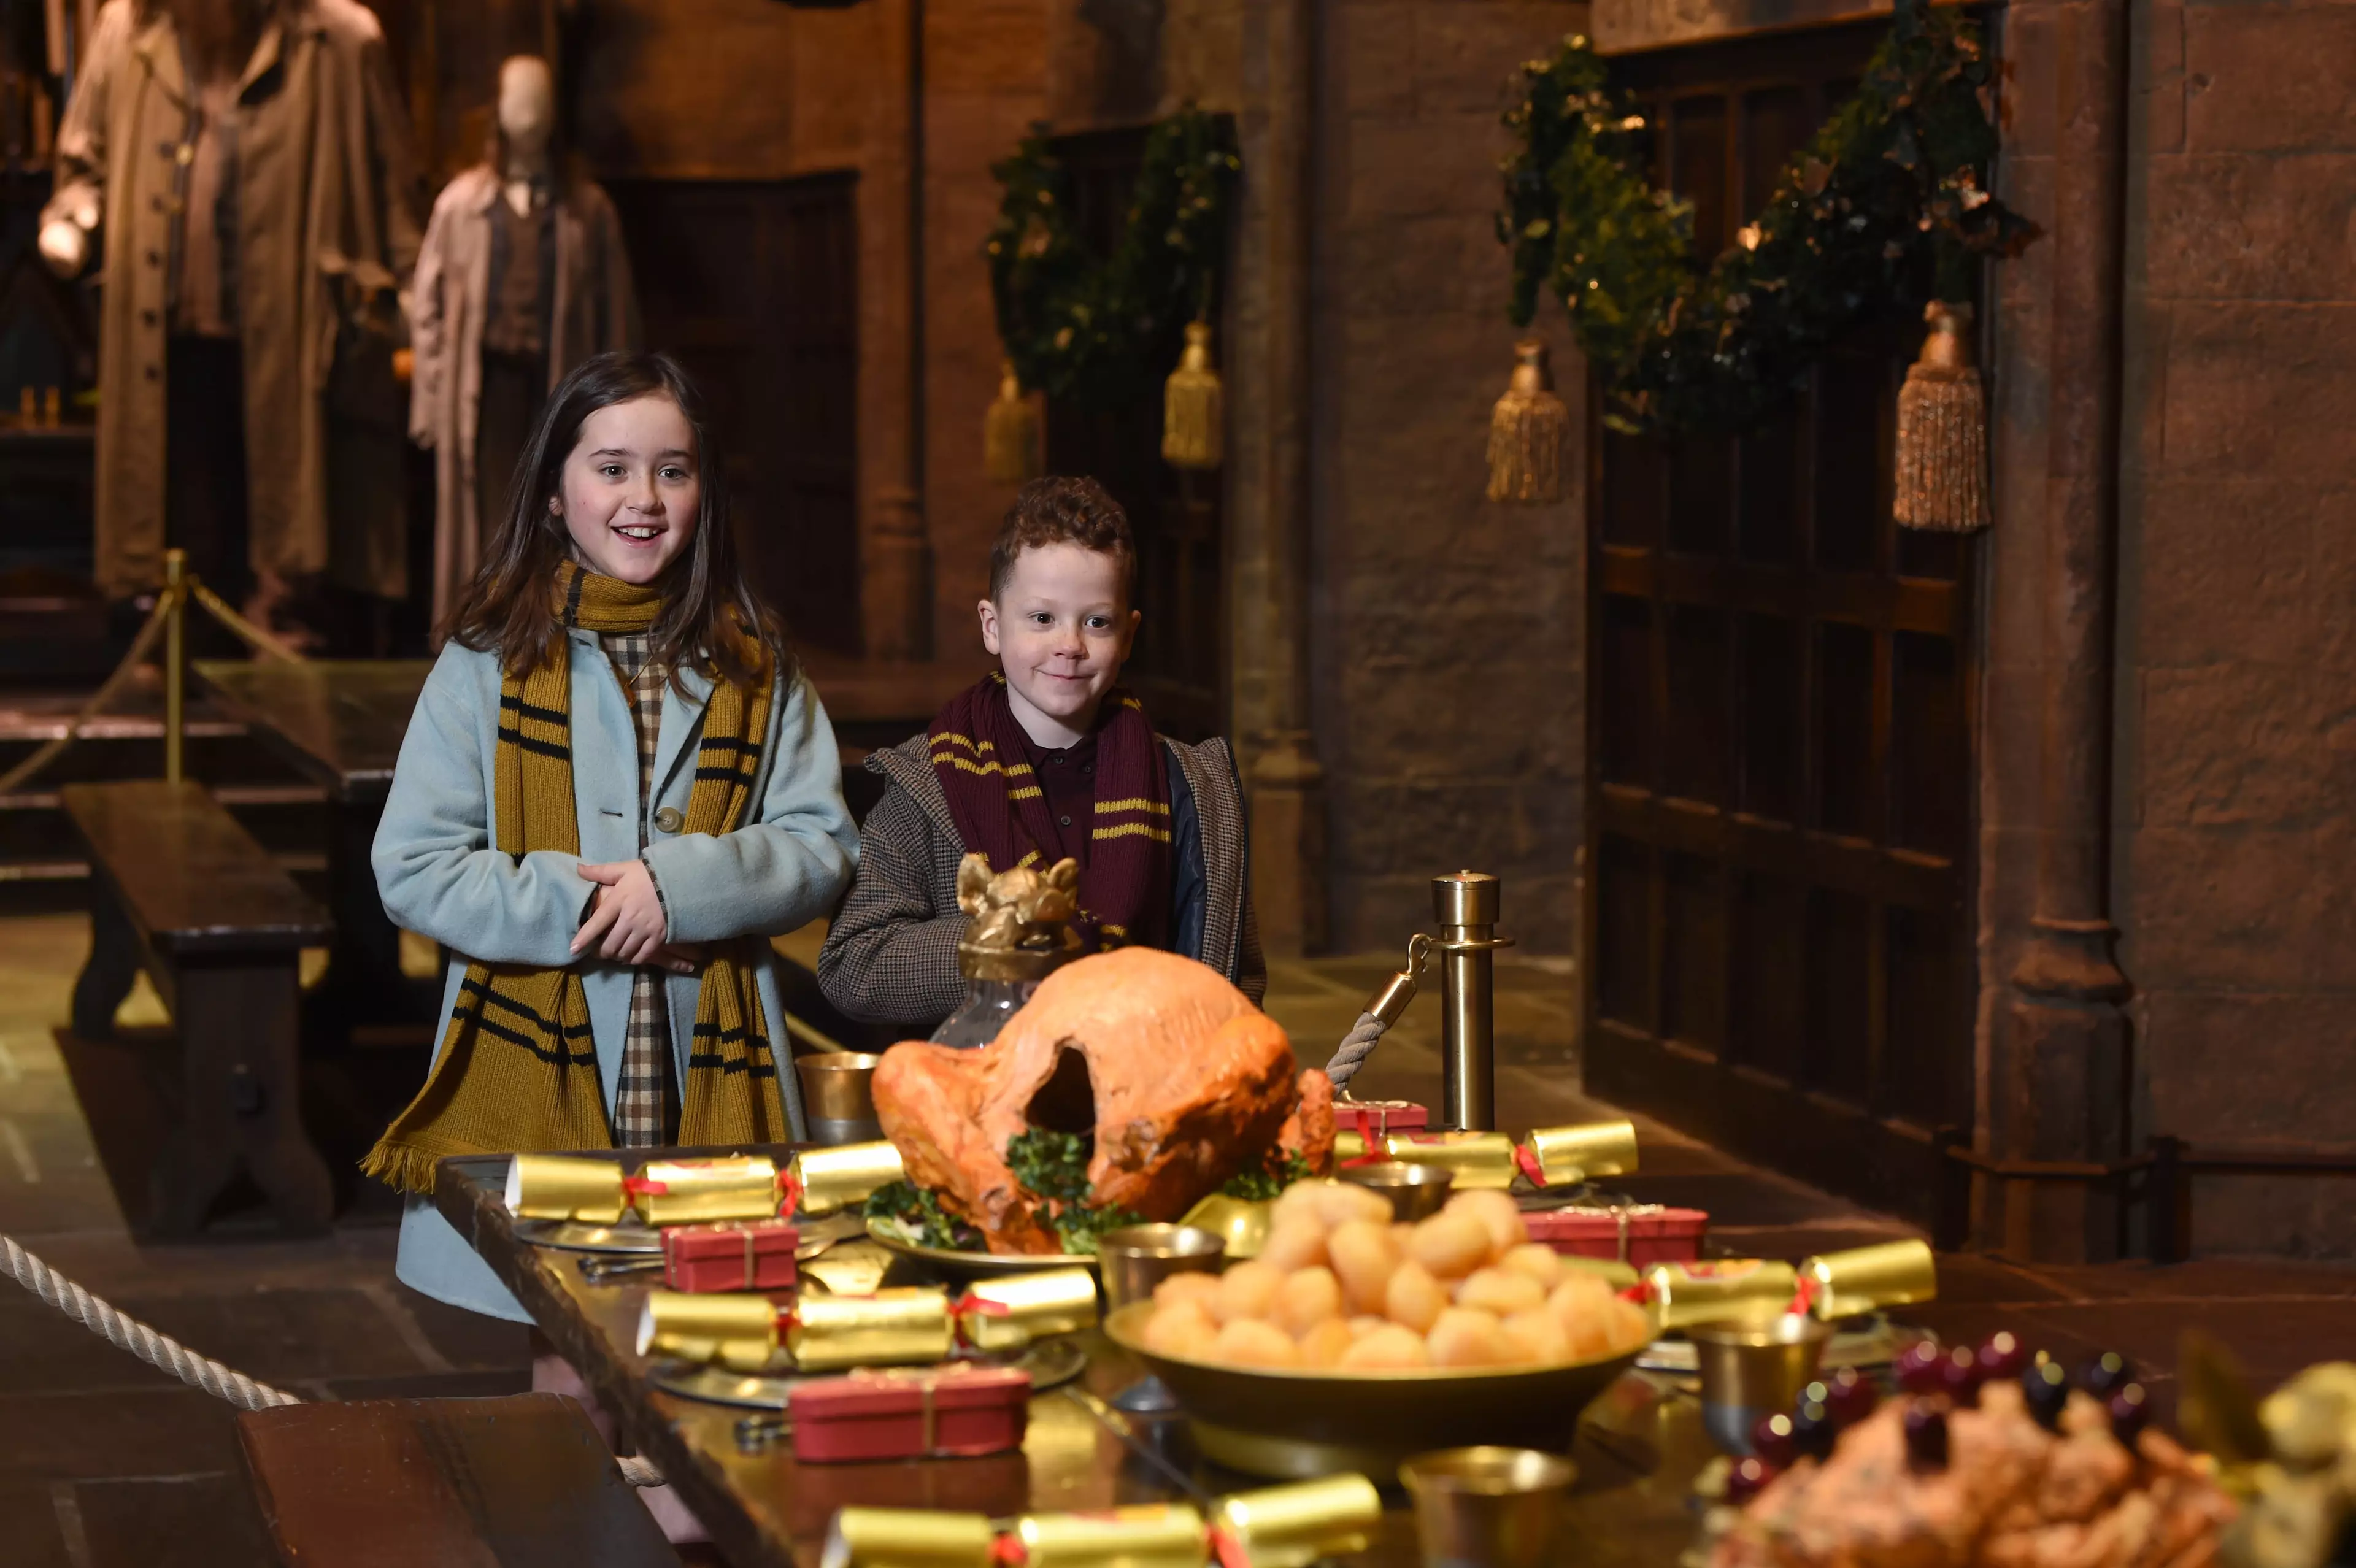 You can have a seat at a Hogwarts feast (